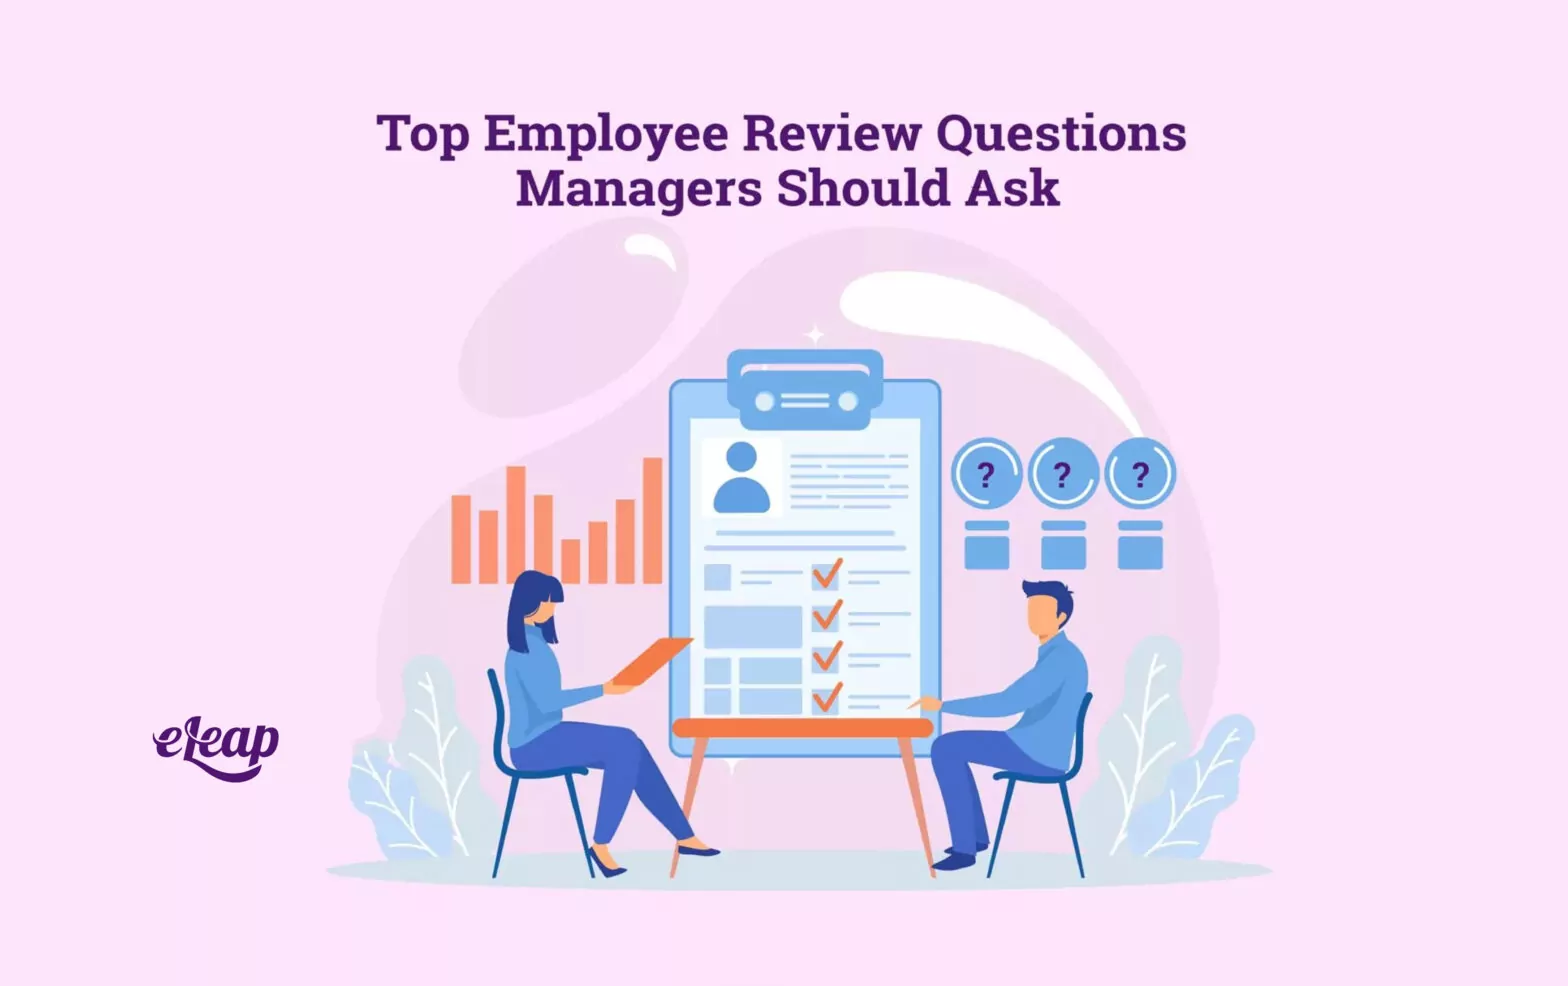 Top Employee Review Questions Managers Should Ask